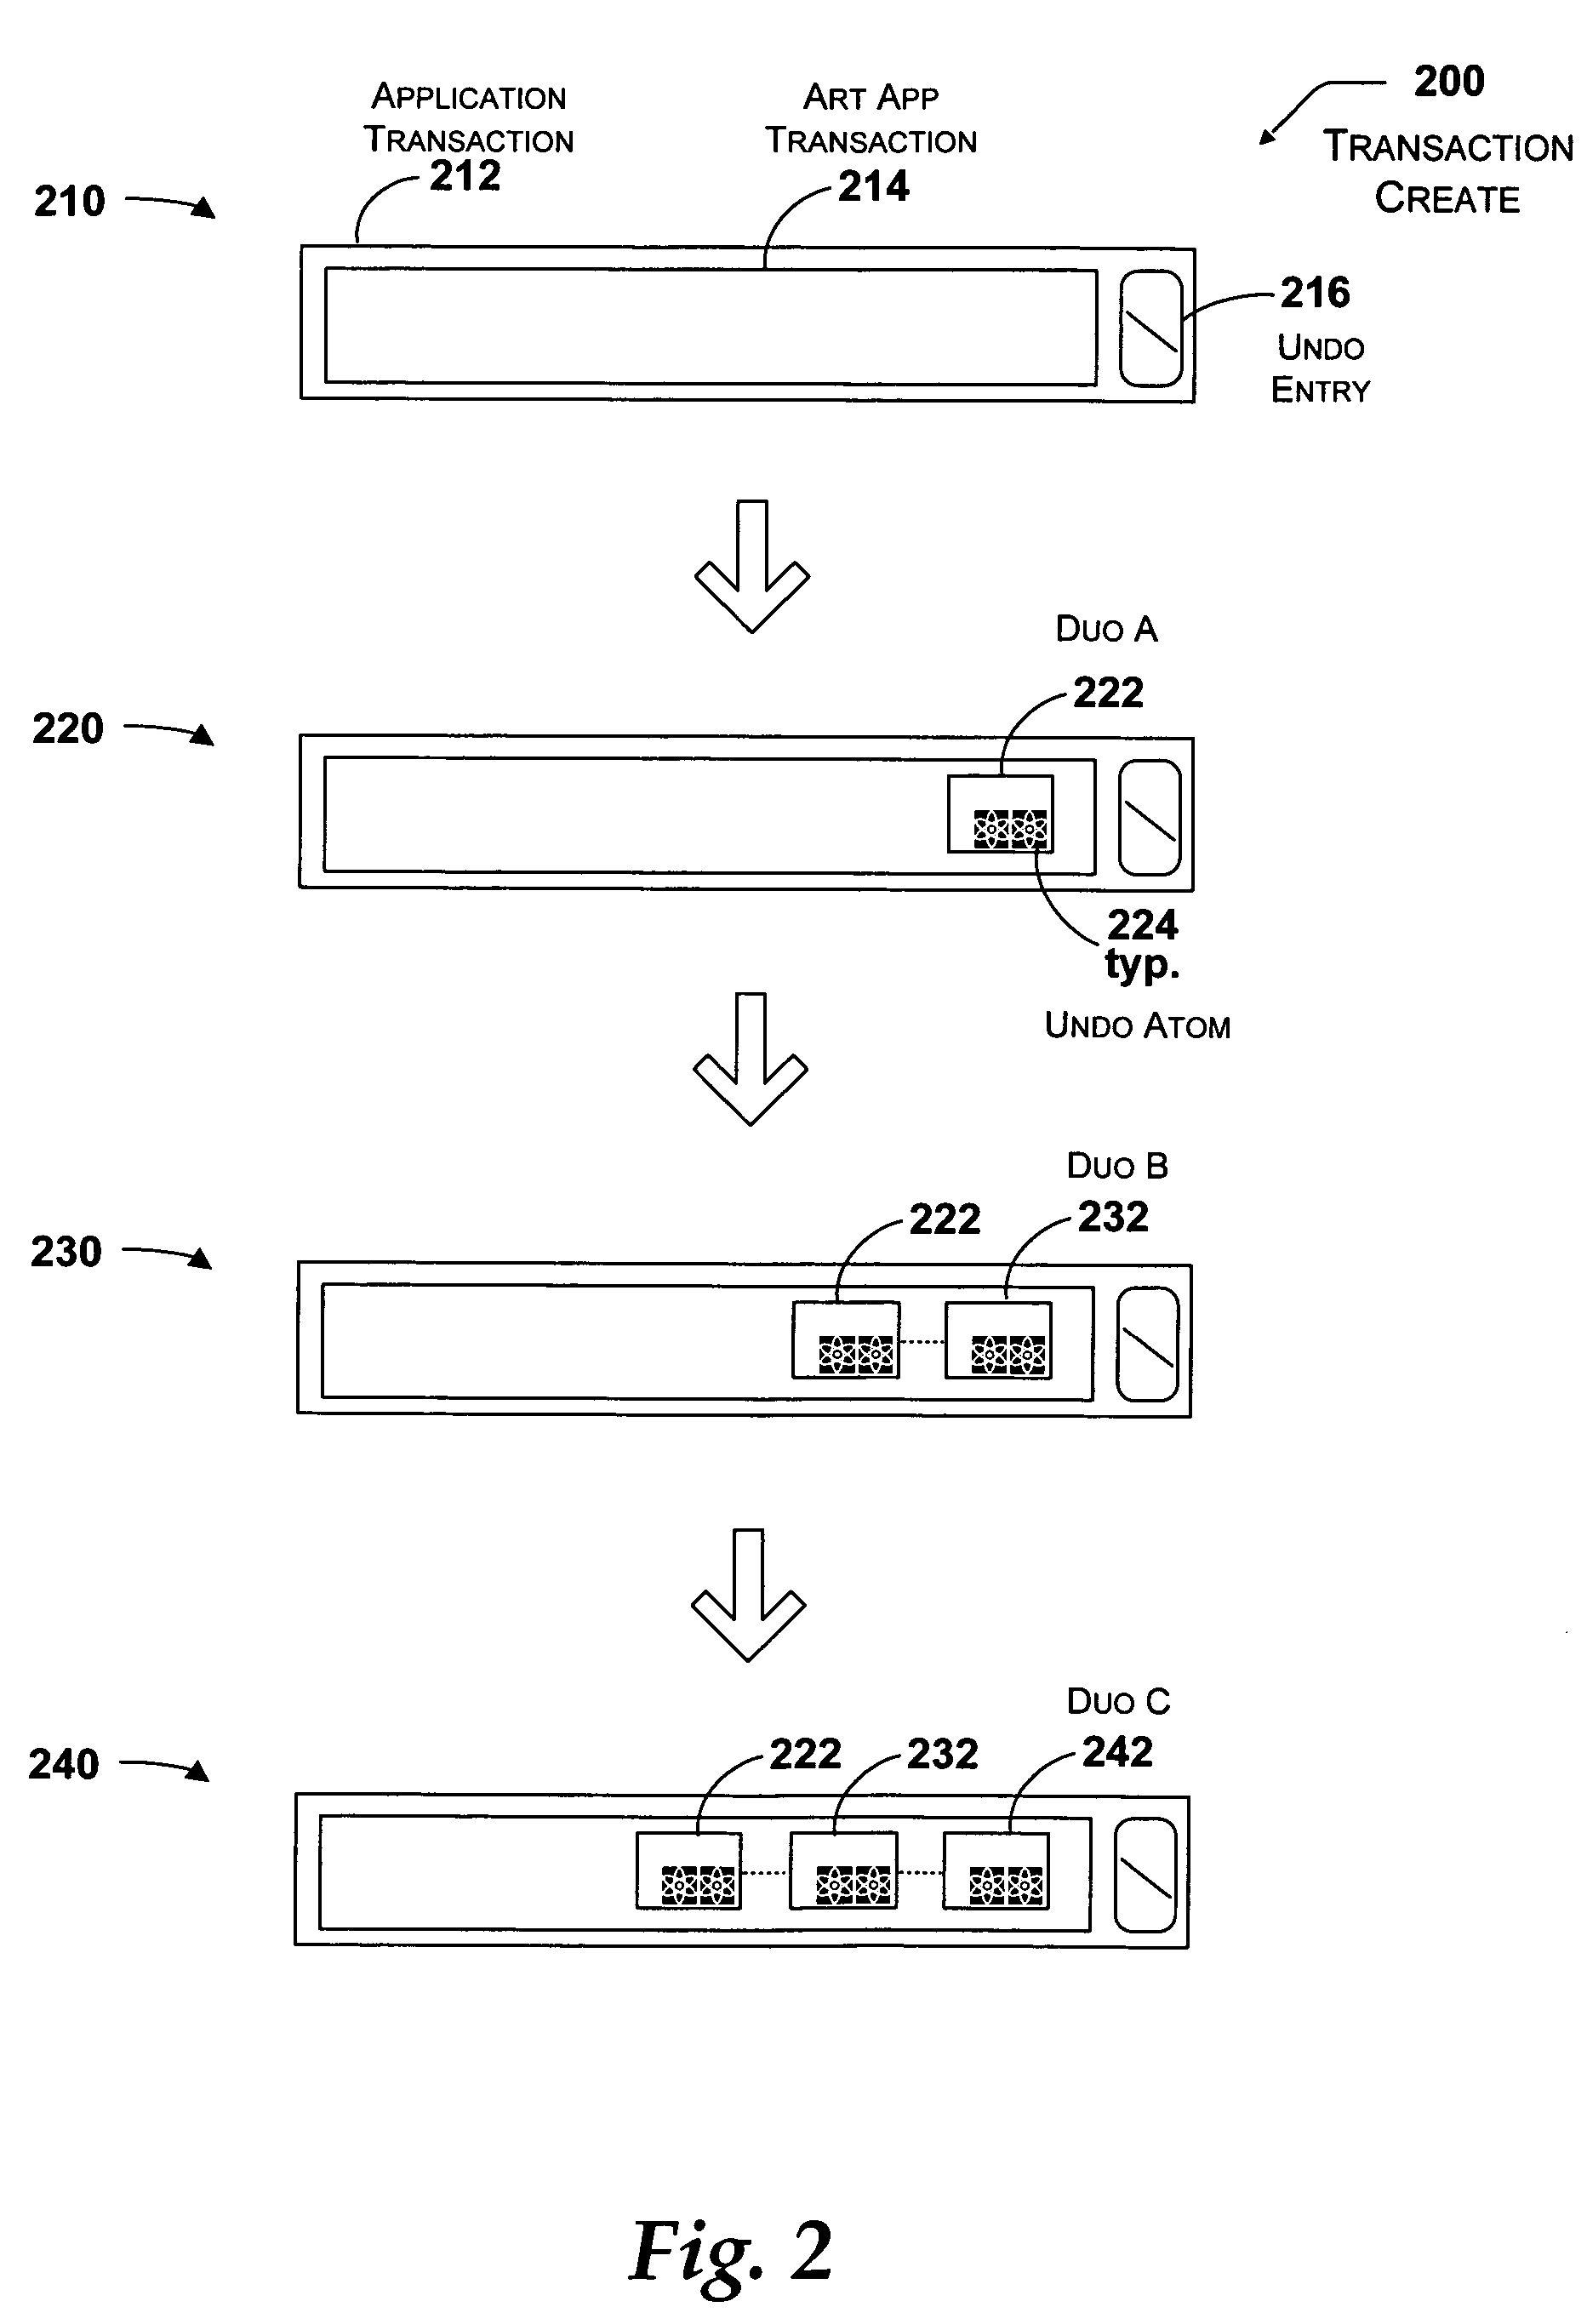 System and method for undoing application actions using inverse actions with atomic rollback